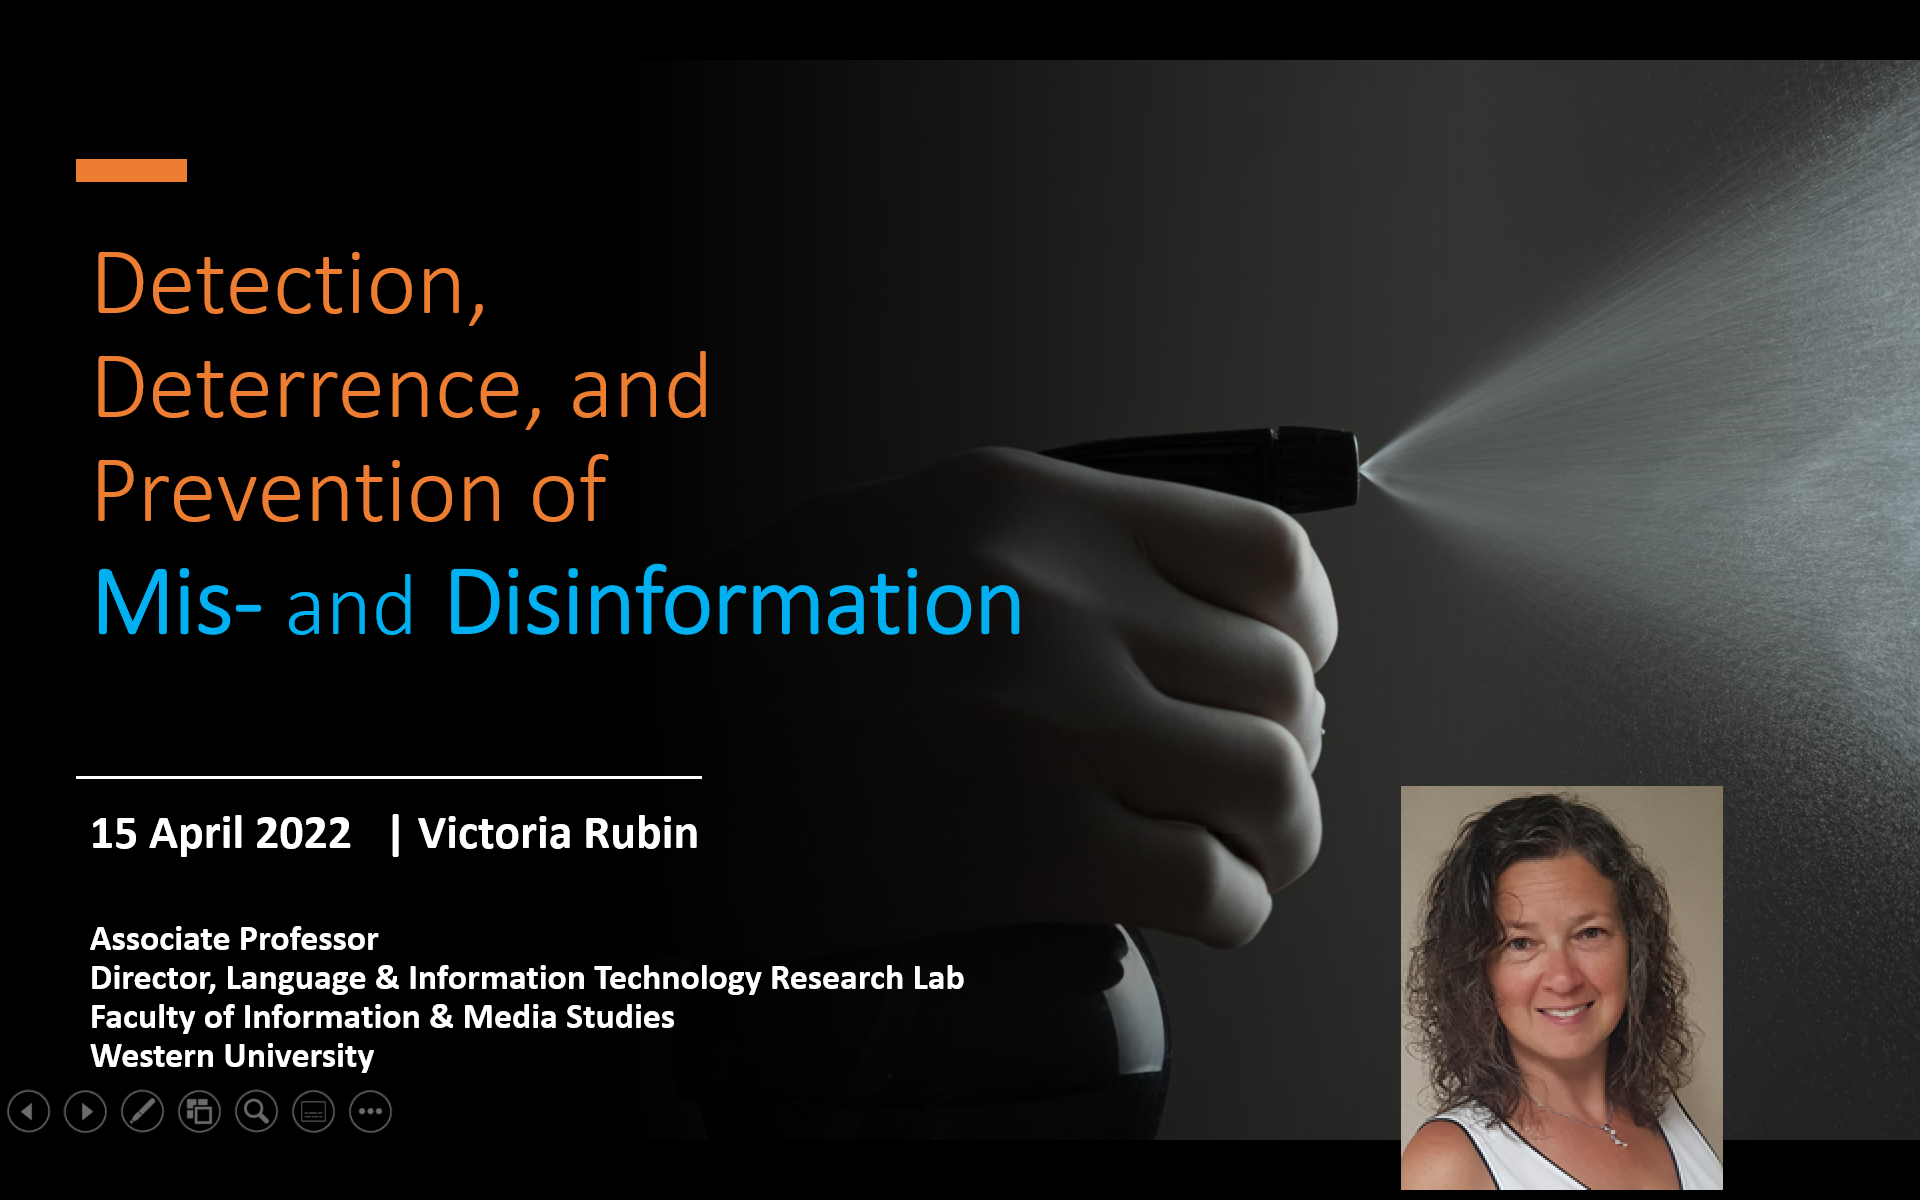 Detection, Deterrence, and Prevention of Mis- and Disinformation by Victoria L. Rubin; 15 April 2022